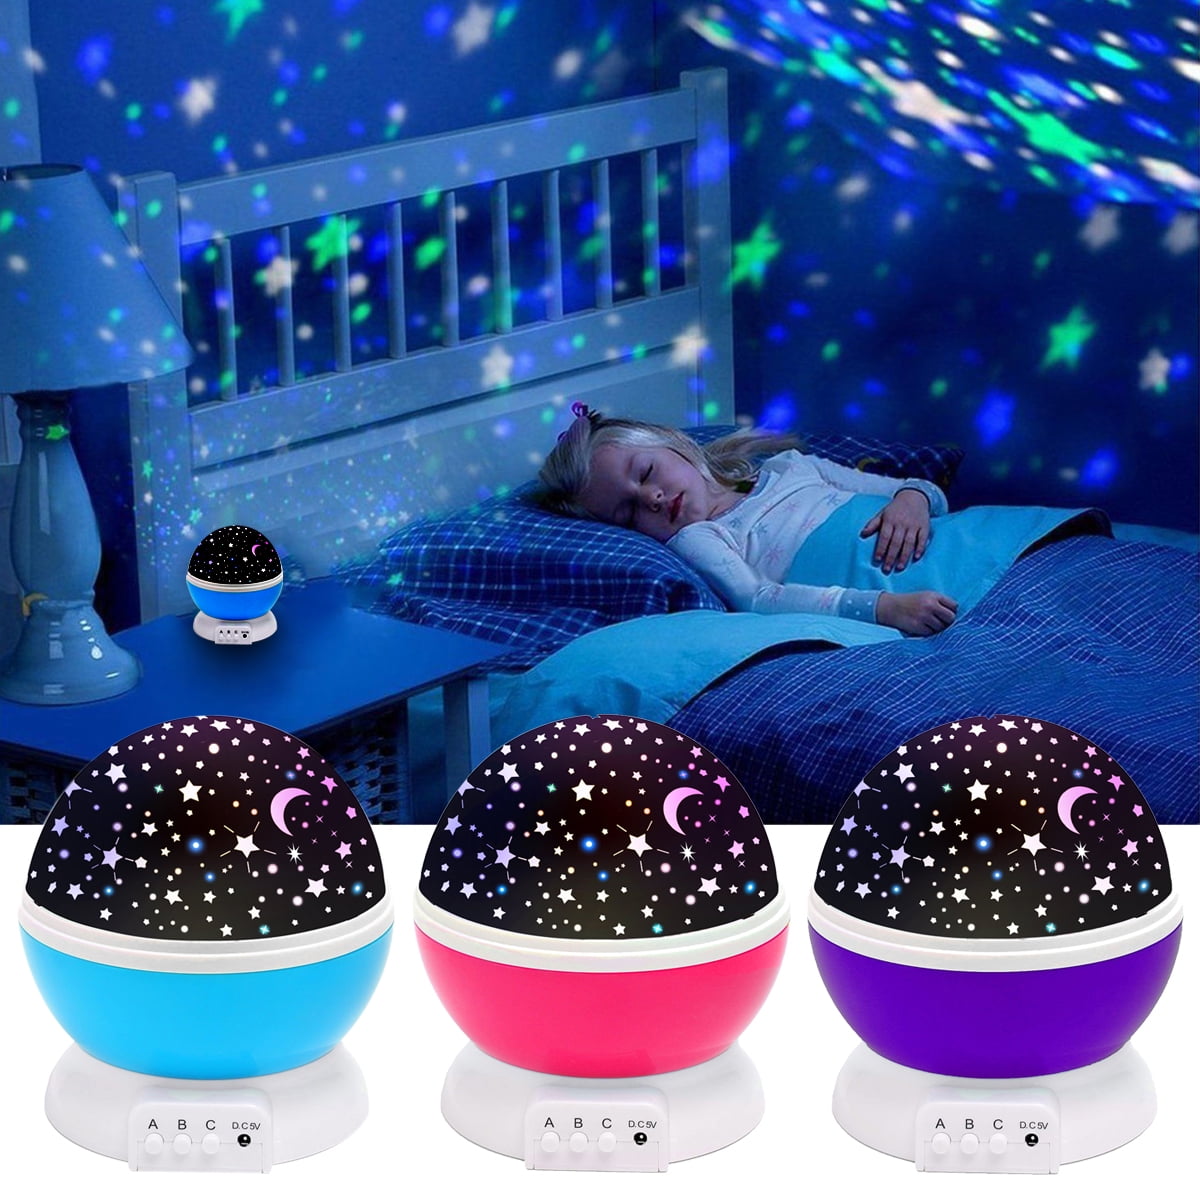 Details about   USB Starry Sky LED Night Light Projector Rotating Disco Lights For Home Decor ER 